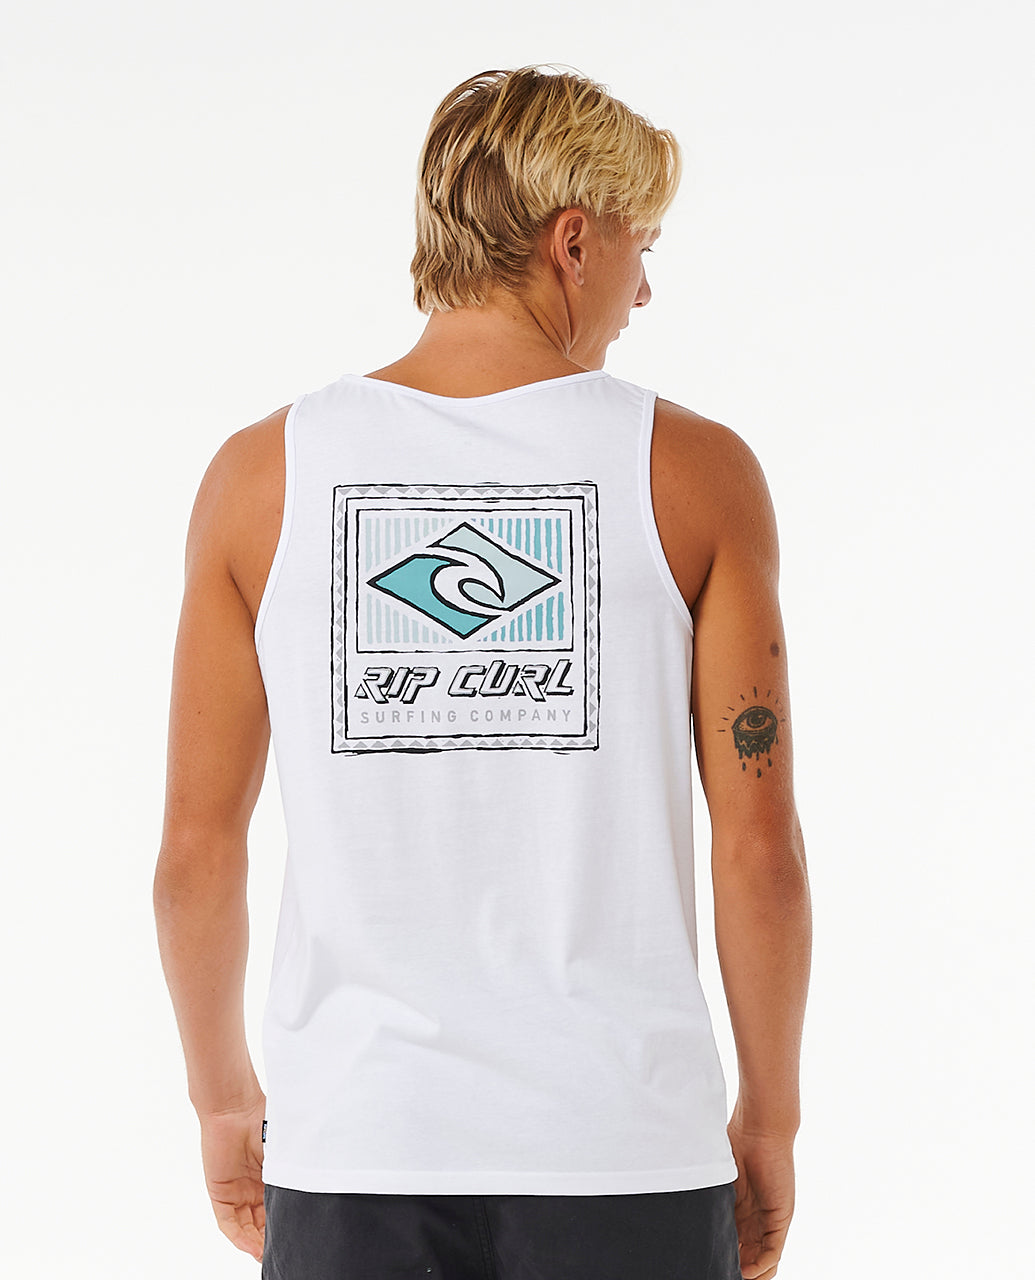 TRADITIONS TANK